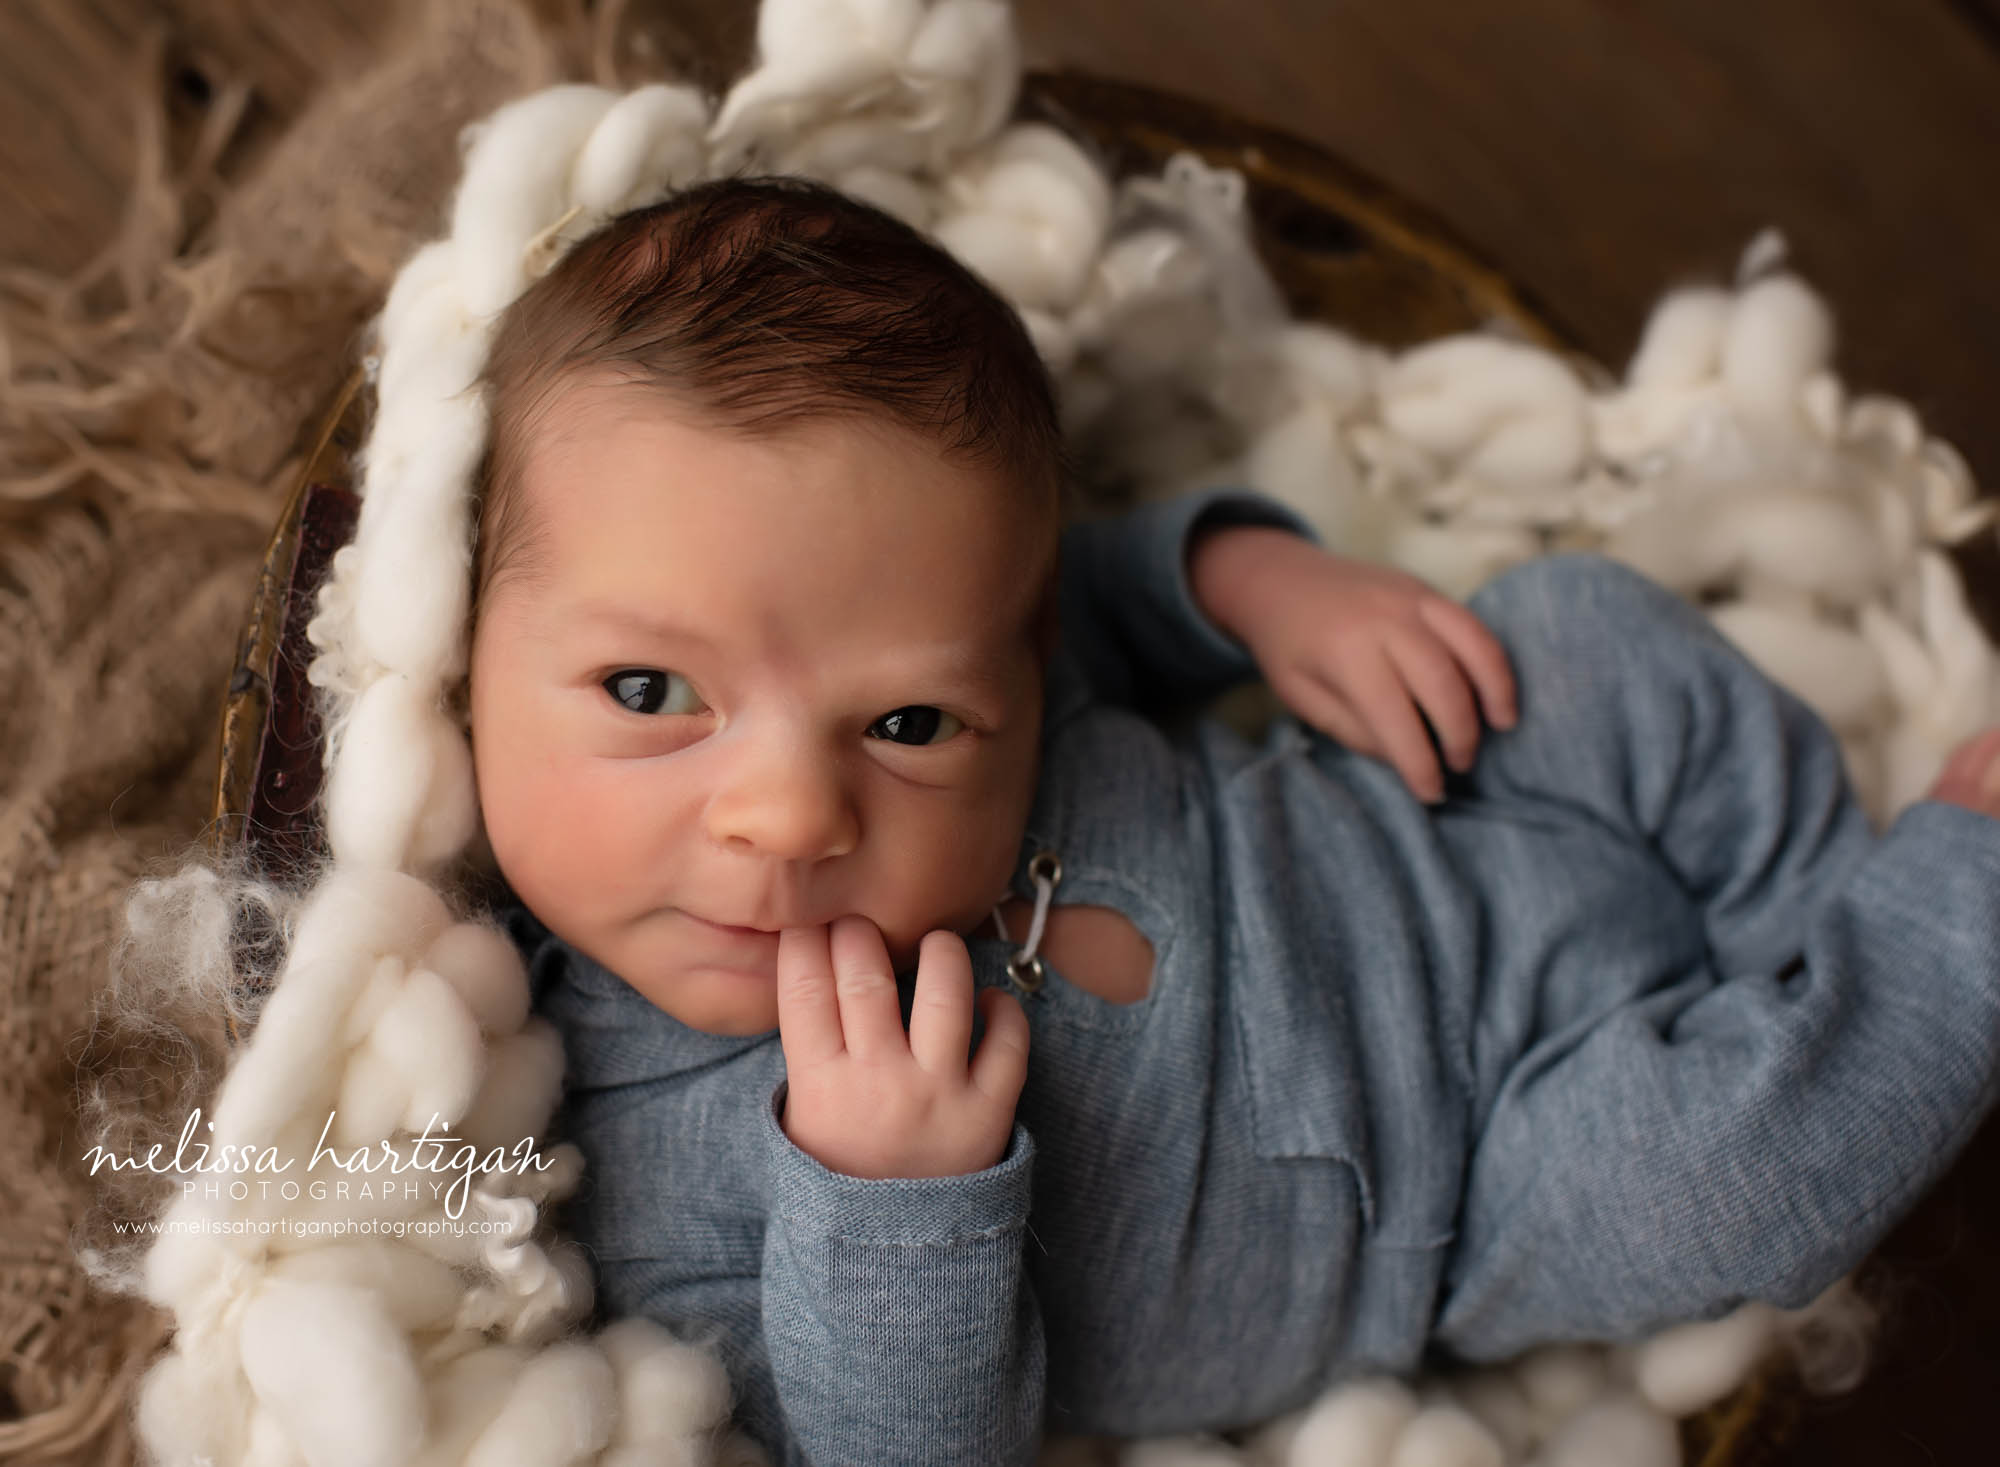 baby boy posed in bowl with cream colored fluff layer and blue newborn outfit newborn photography CT coventry